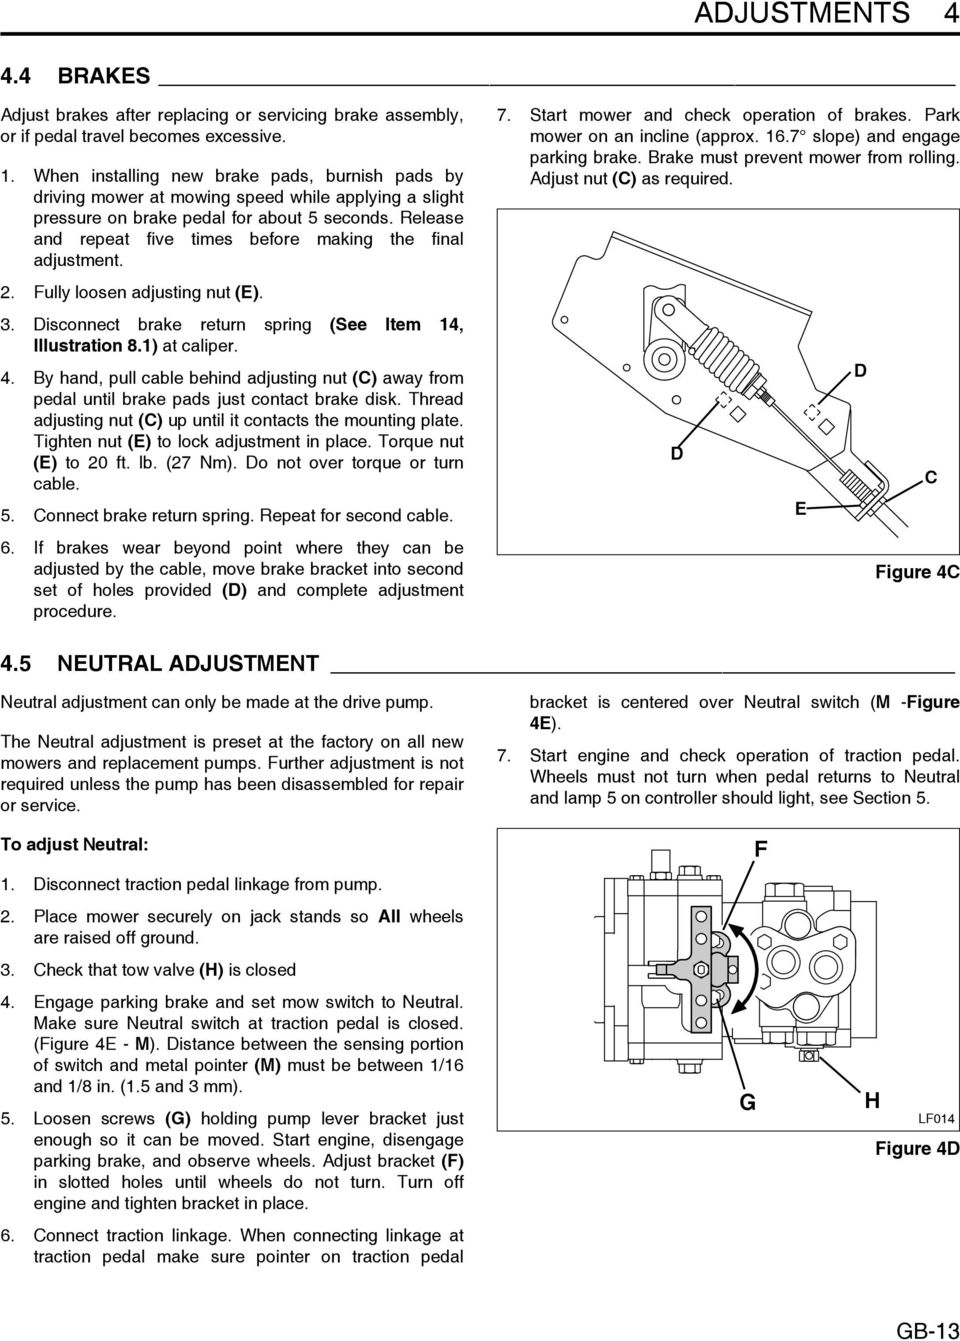 Release and repeat five times before making the final adjustment. 2. Fully loosen adjusting nut (E). 3. Disconnect brake return spring (See Item 14, Illustration 8.1) at caliper. 4.